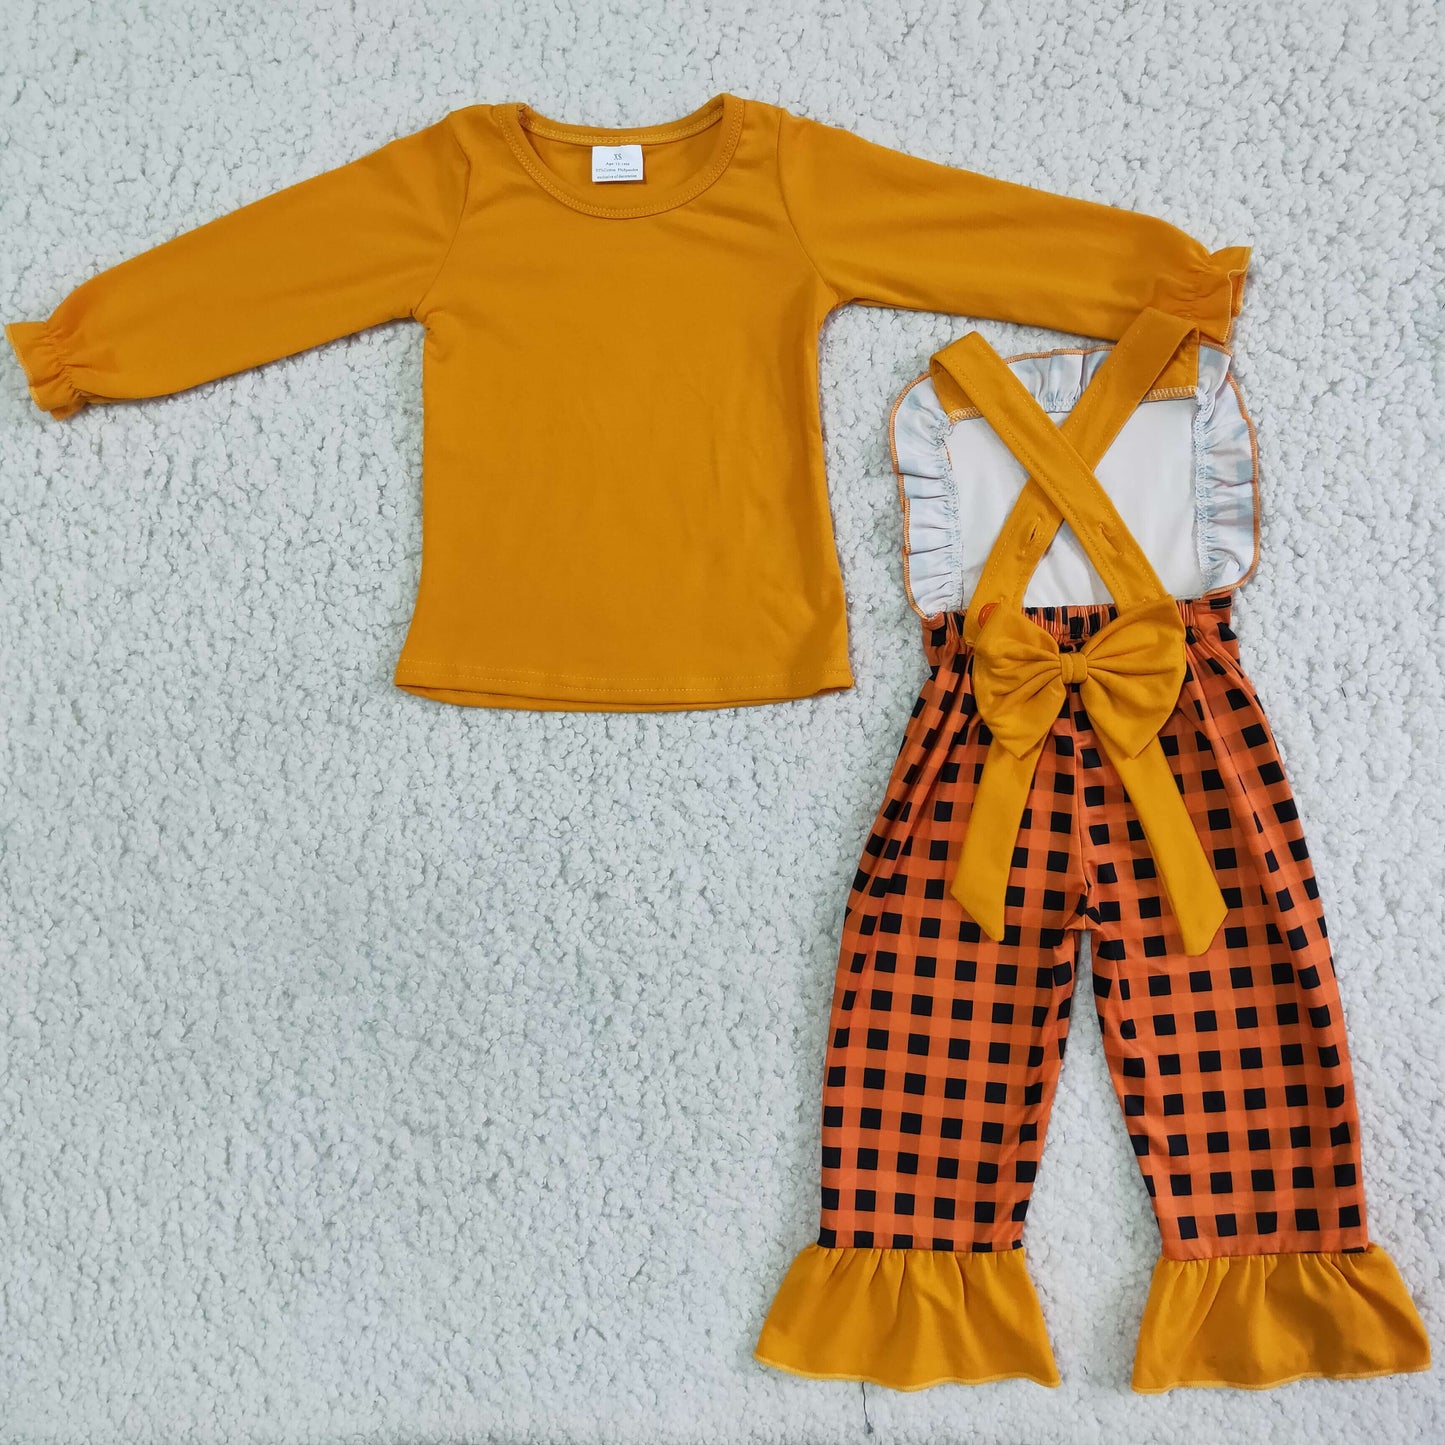 Girls overall design Thanksgiving outfits        6 A10-18